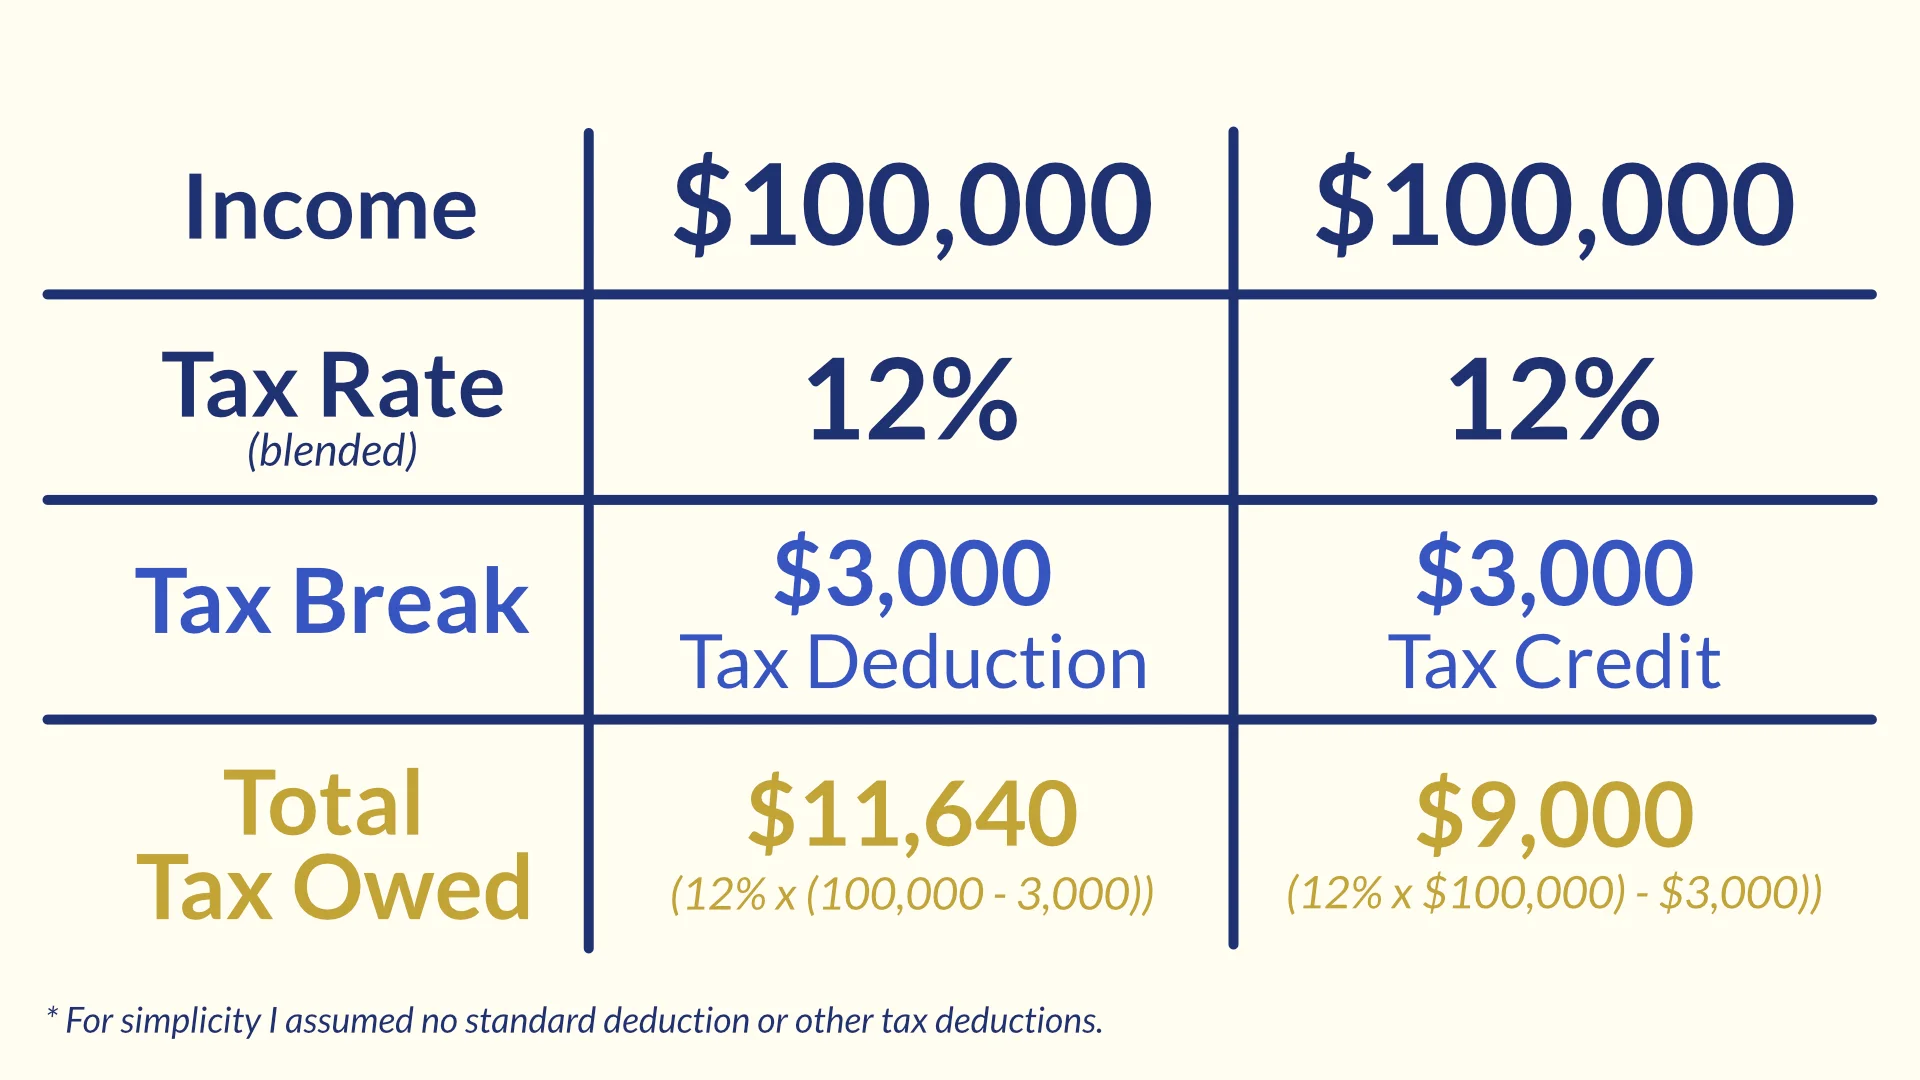 tax credits are direct savings, while tax deductions just reduce your taxable income